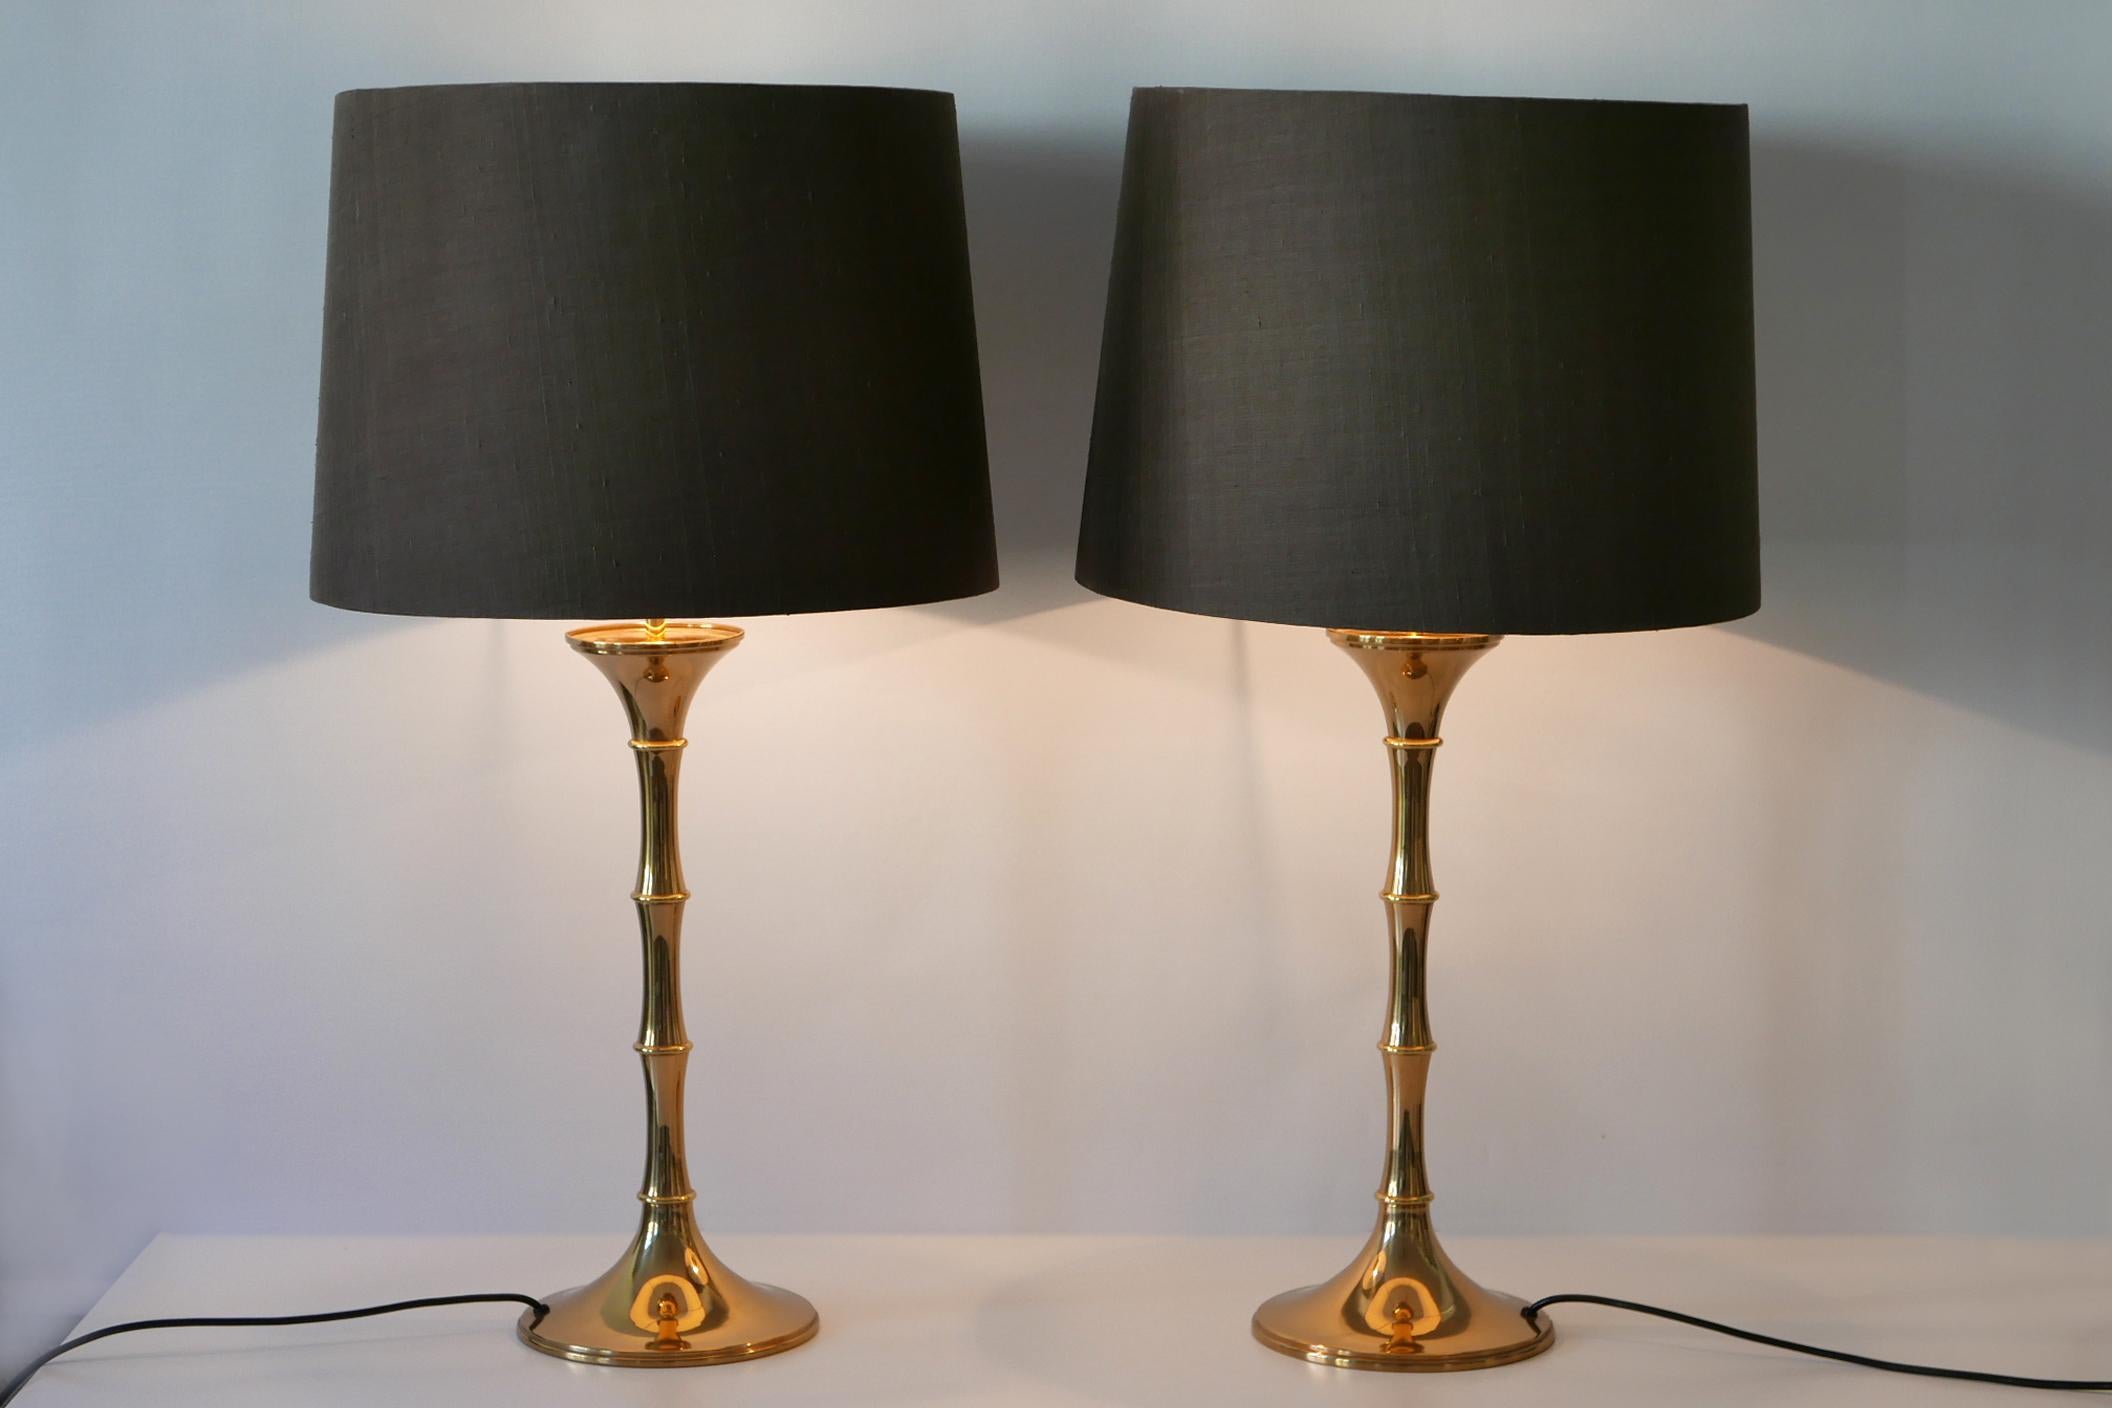 Set of two elegant Mid-Century Modern brass bamboo table lamps. Model 'ML 1'. Designed by Ingo Maurer, 1968 for Design M, Munich, Germany.

Executed in brass tube and sheet, purple-brown silk fabric shade (one is slightly darker), each lamp comes